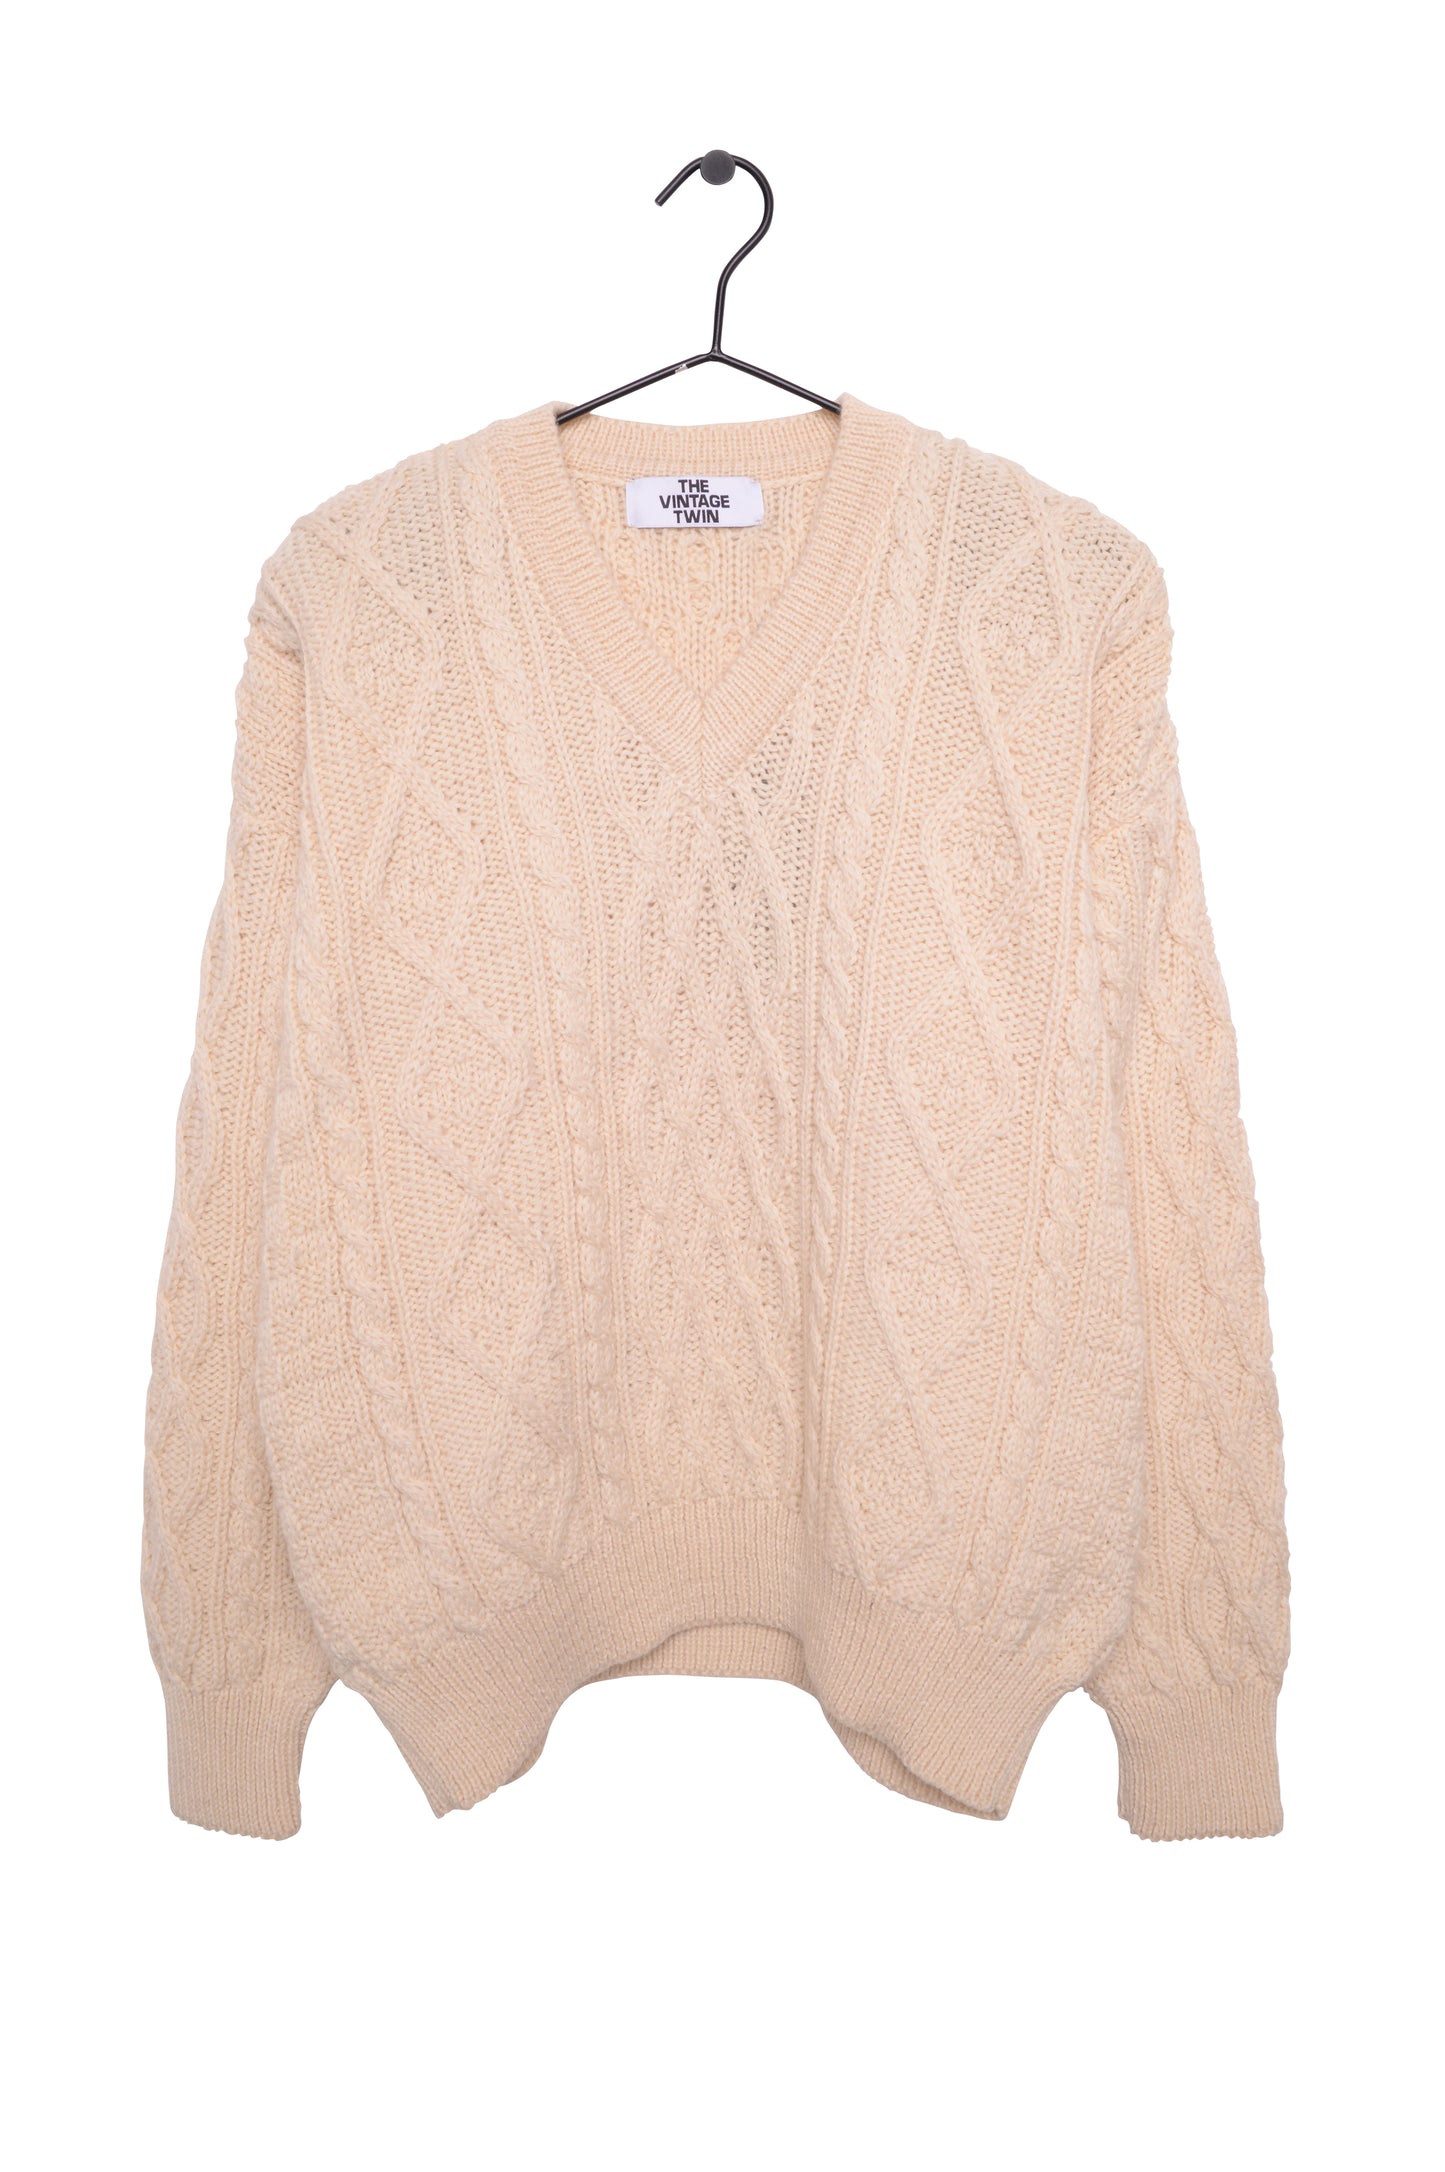 Wool Cable Knit Sweater